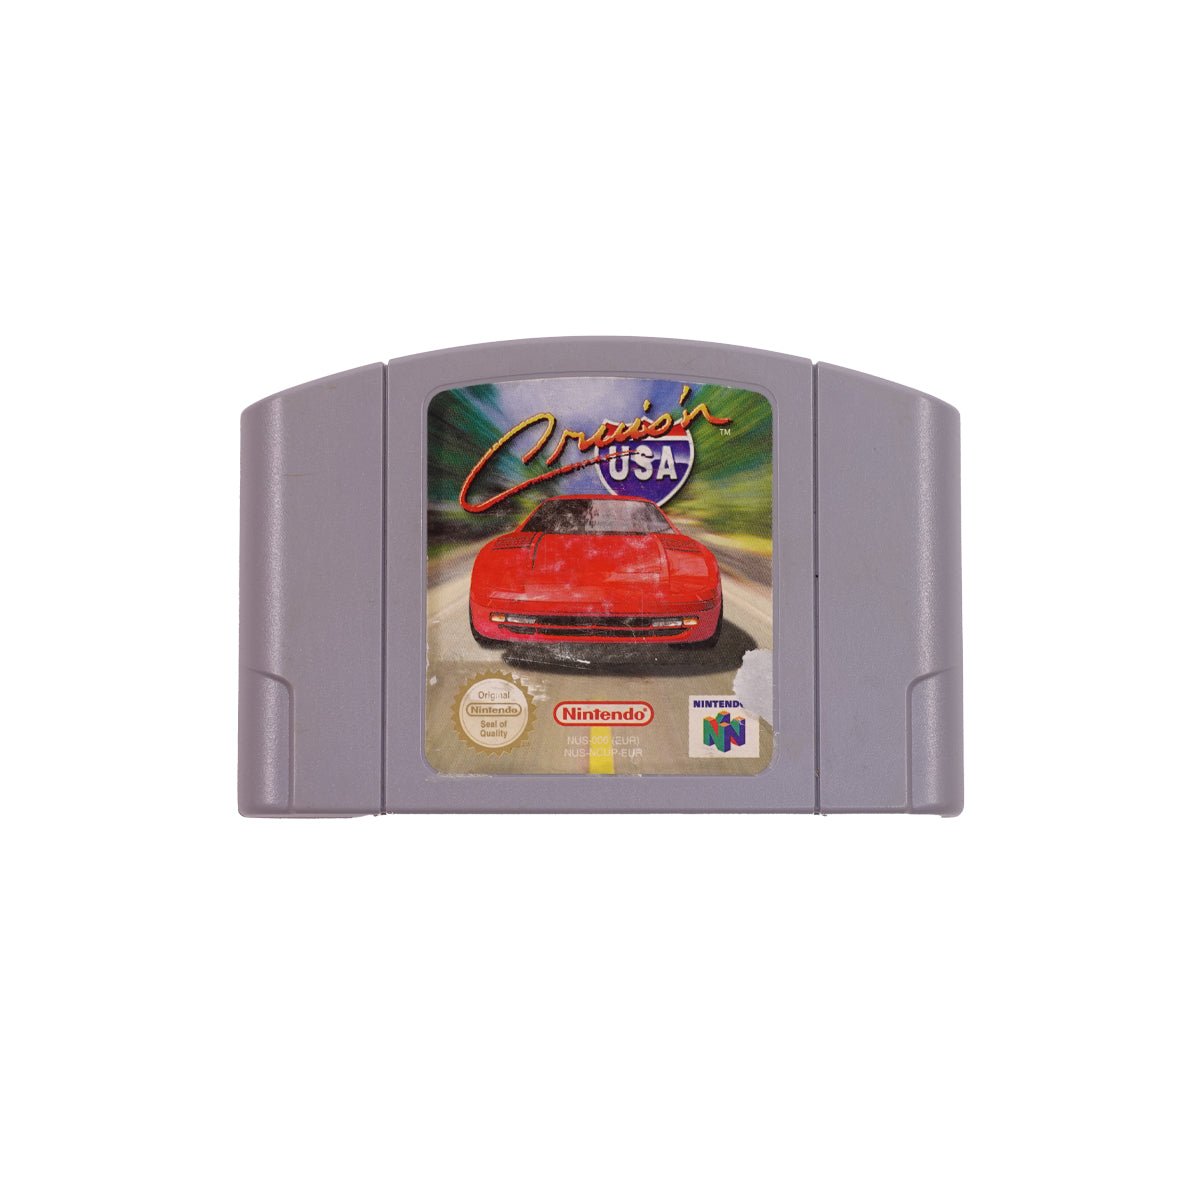 (Pre-Owned) Cruise USA Racing Video Game For Nintendo 64 - Store 974 | ستور ٩٧٤